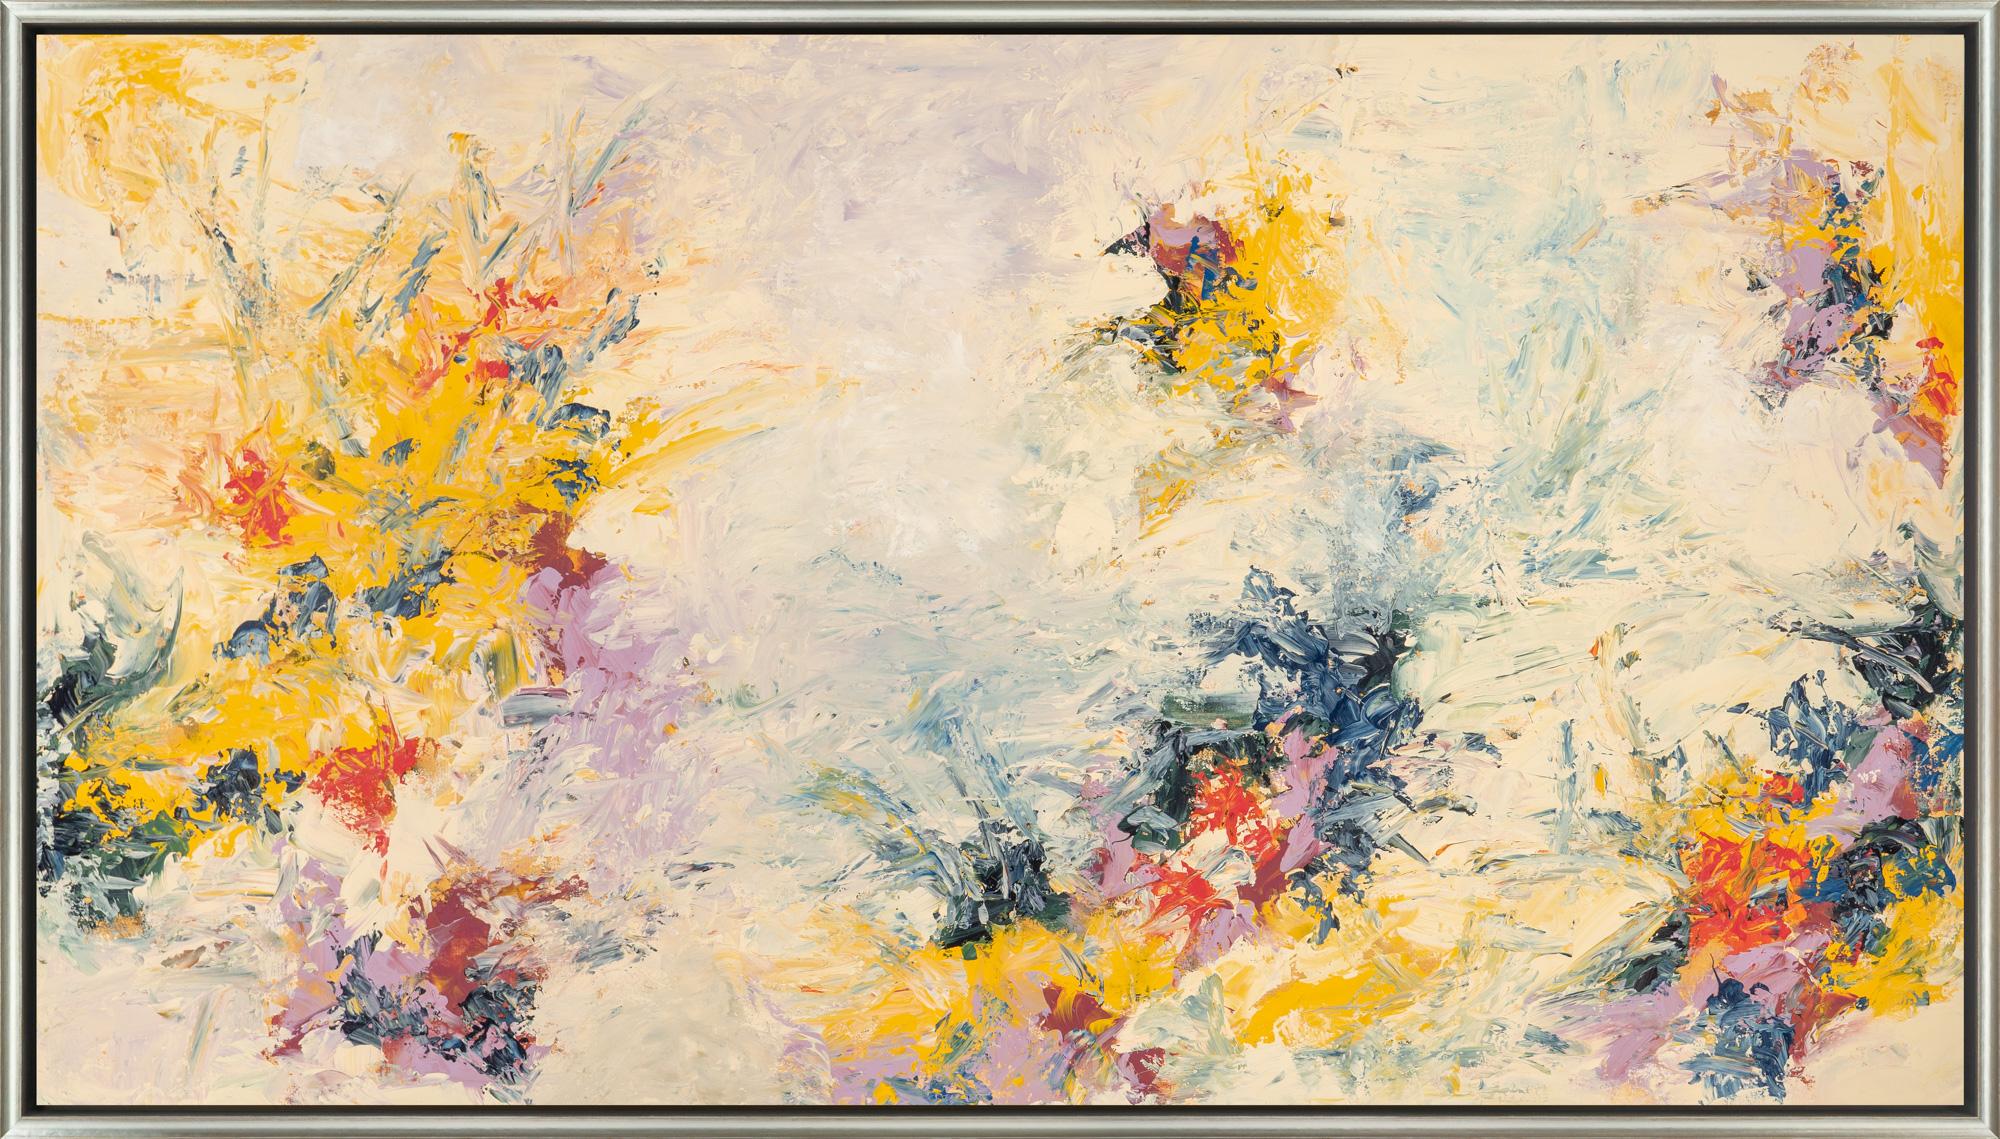 David Skillicorn Abstract Painting - "Alchemy 15-5" Vibrant Expressive Floral Abstract in Bright Color Palette